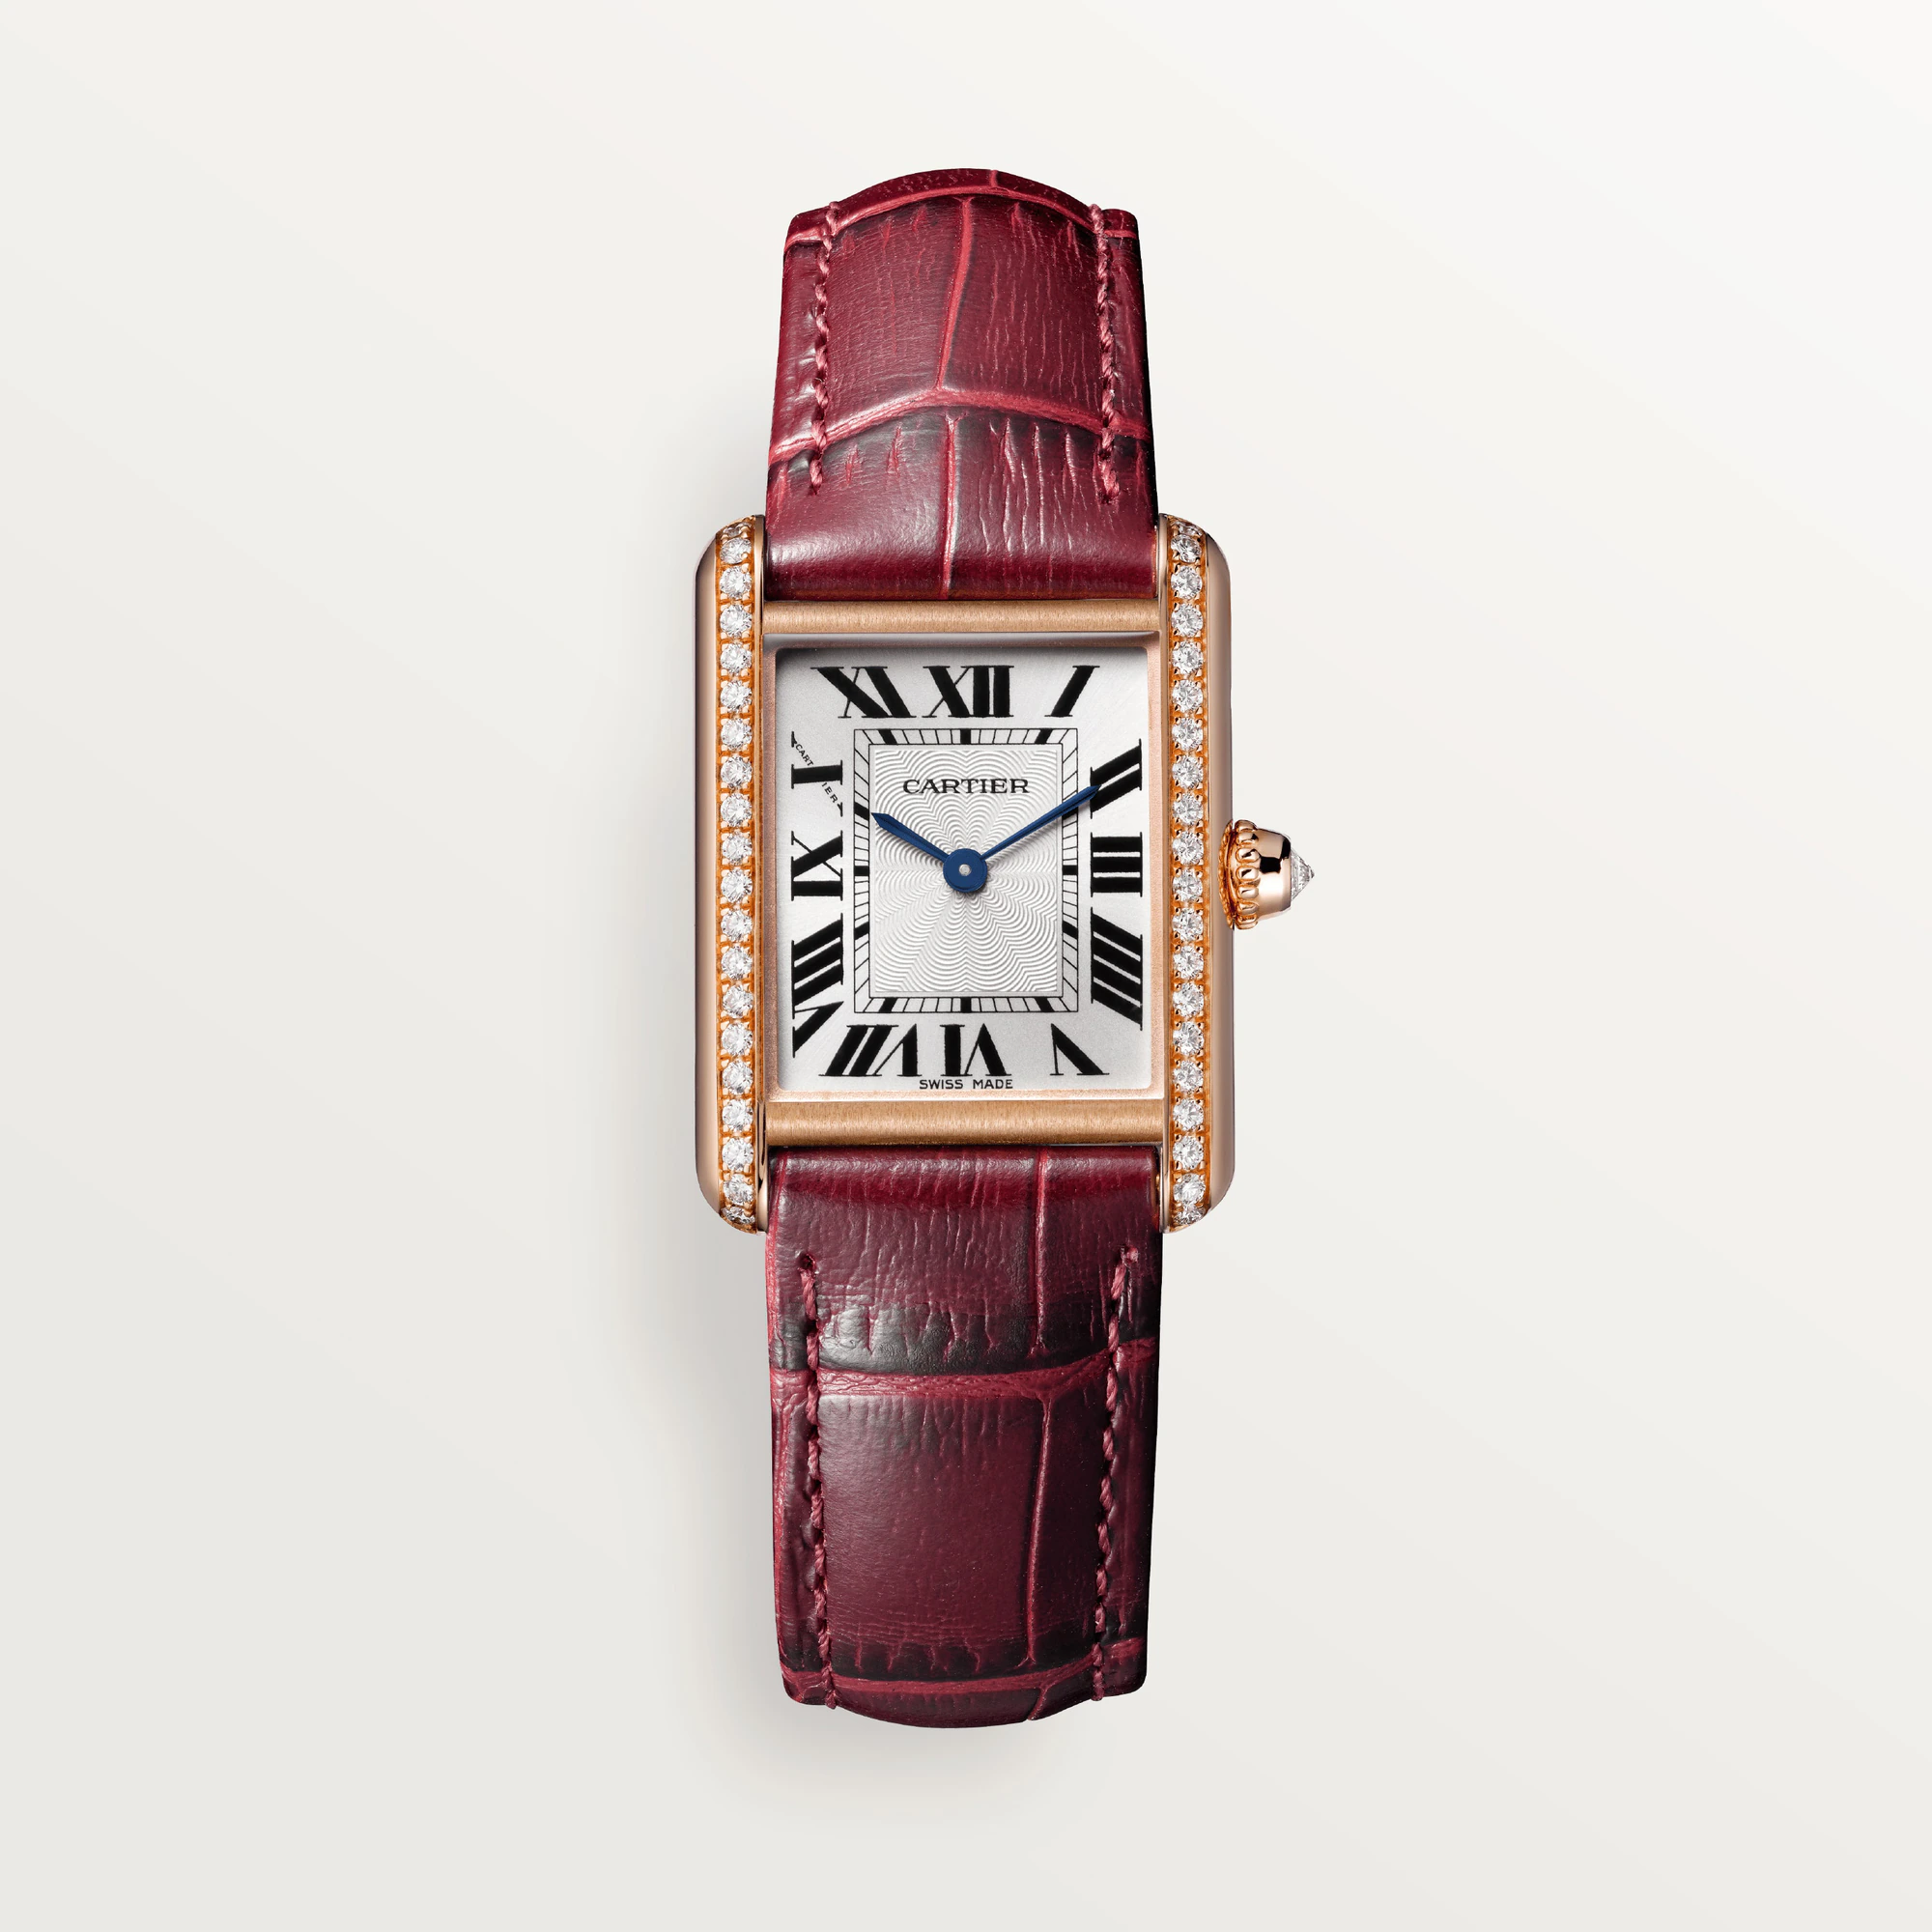 Cartier Tank Francaise Small Rose Gold Diamond Ladies Watch